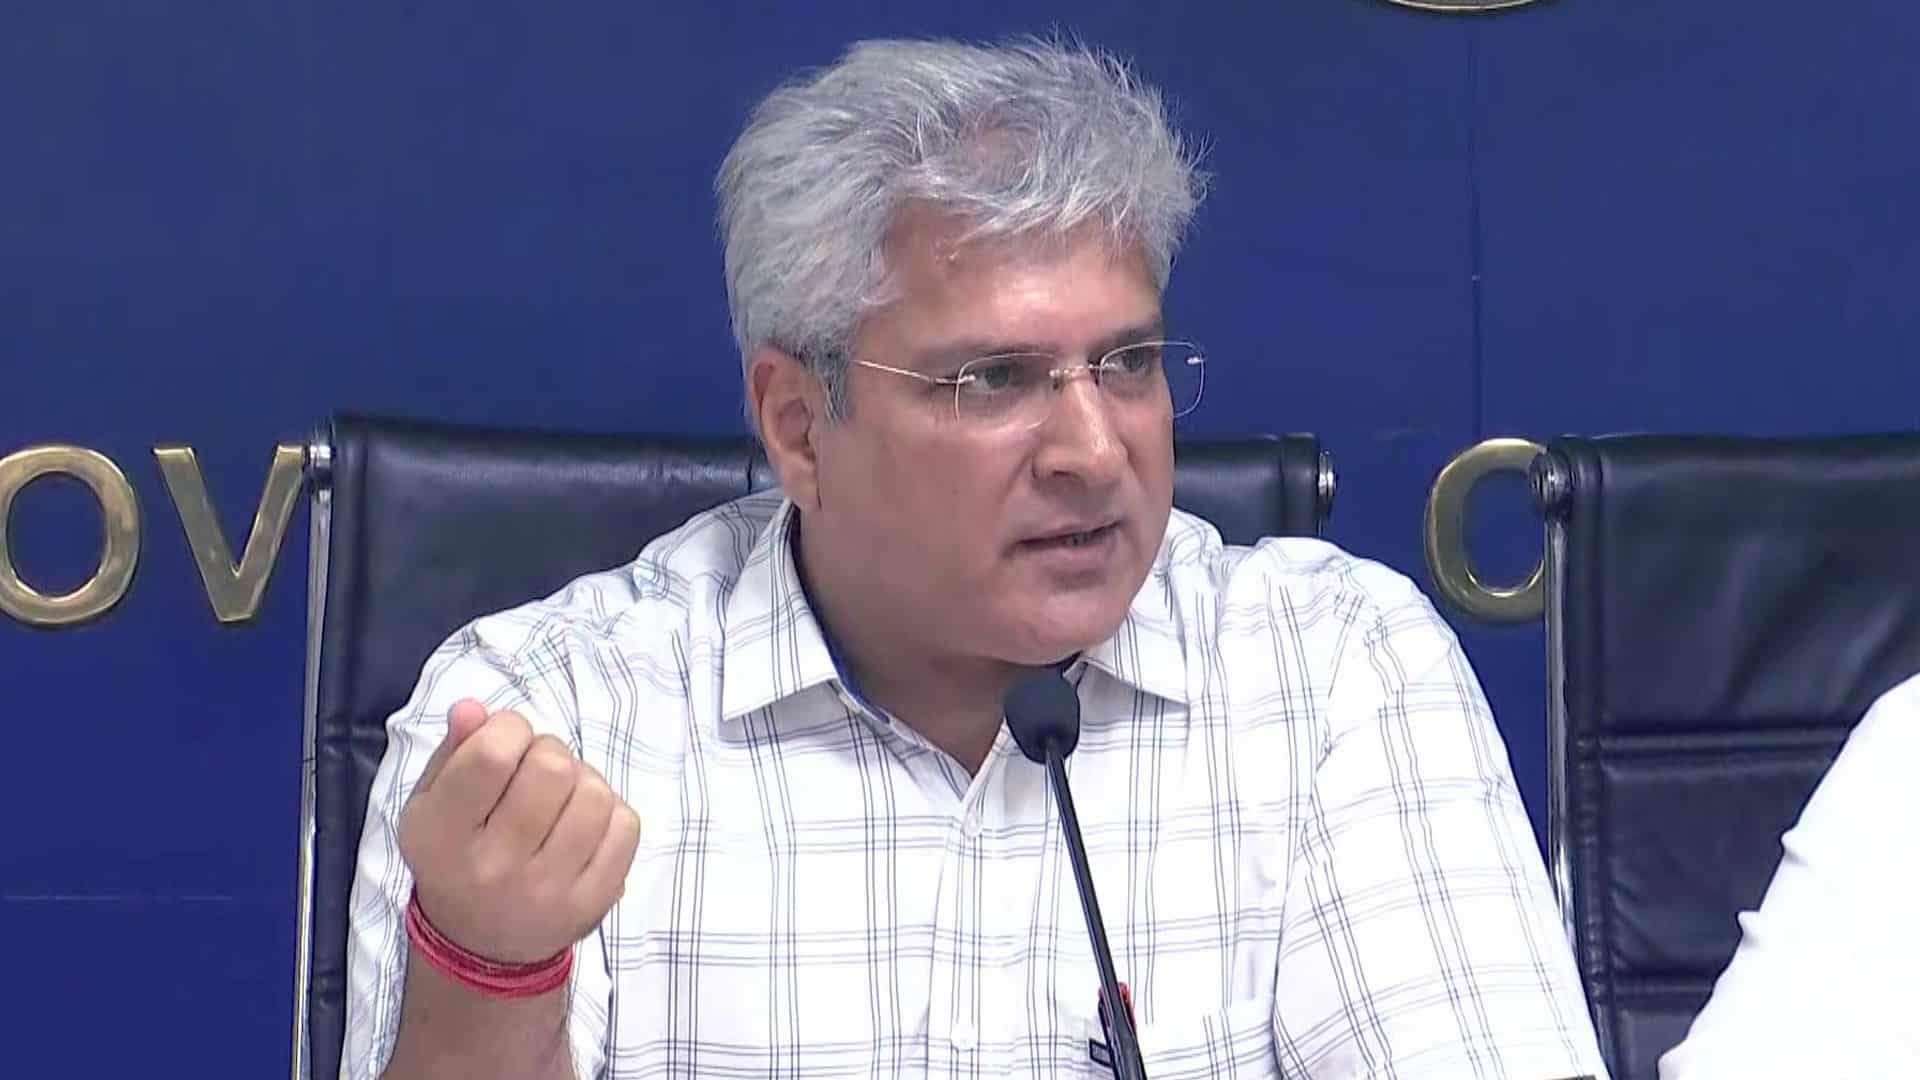 Delhiites adopting new tech, EV contributes to 16.7 pc of vehicles sold in Dec: Kailash Gahlot